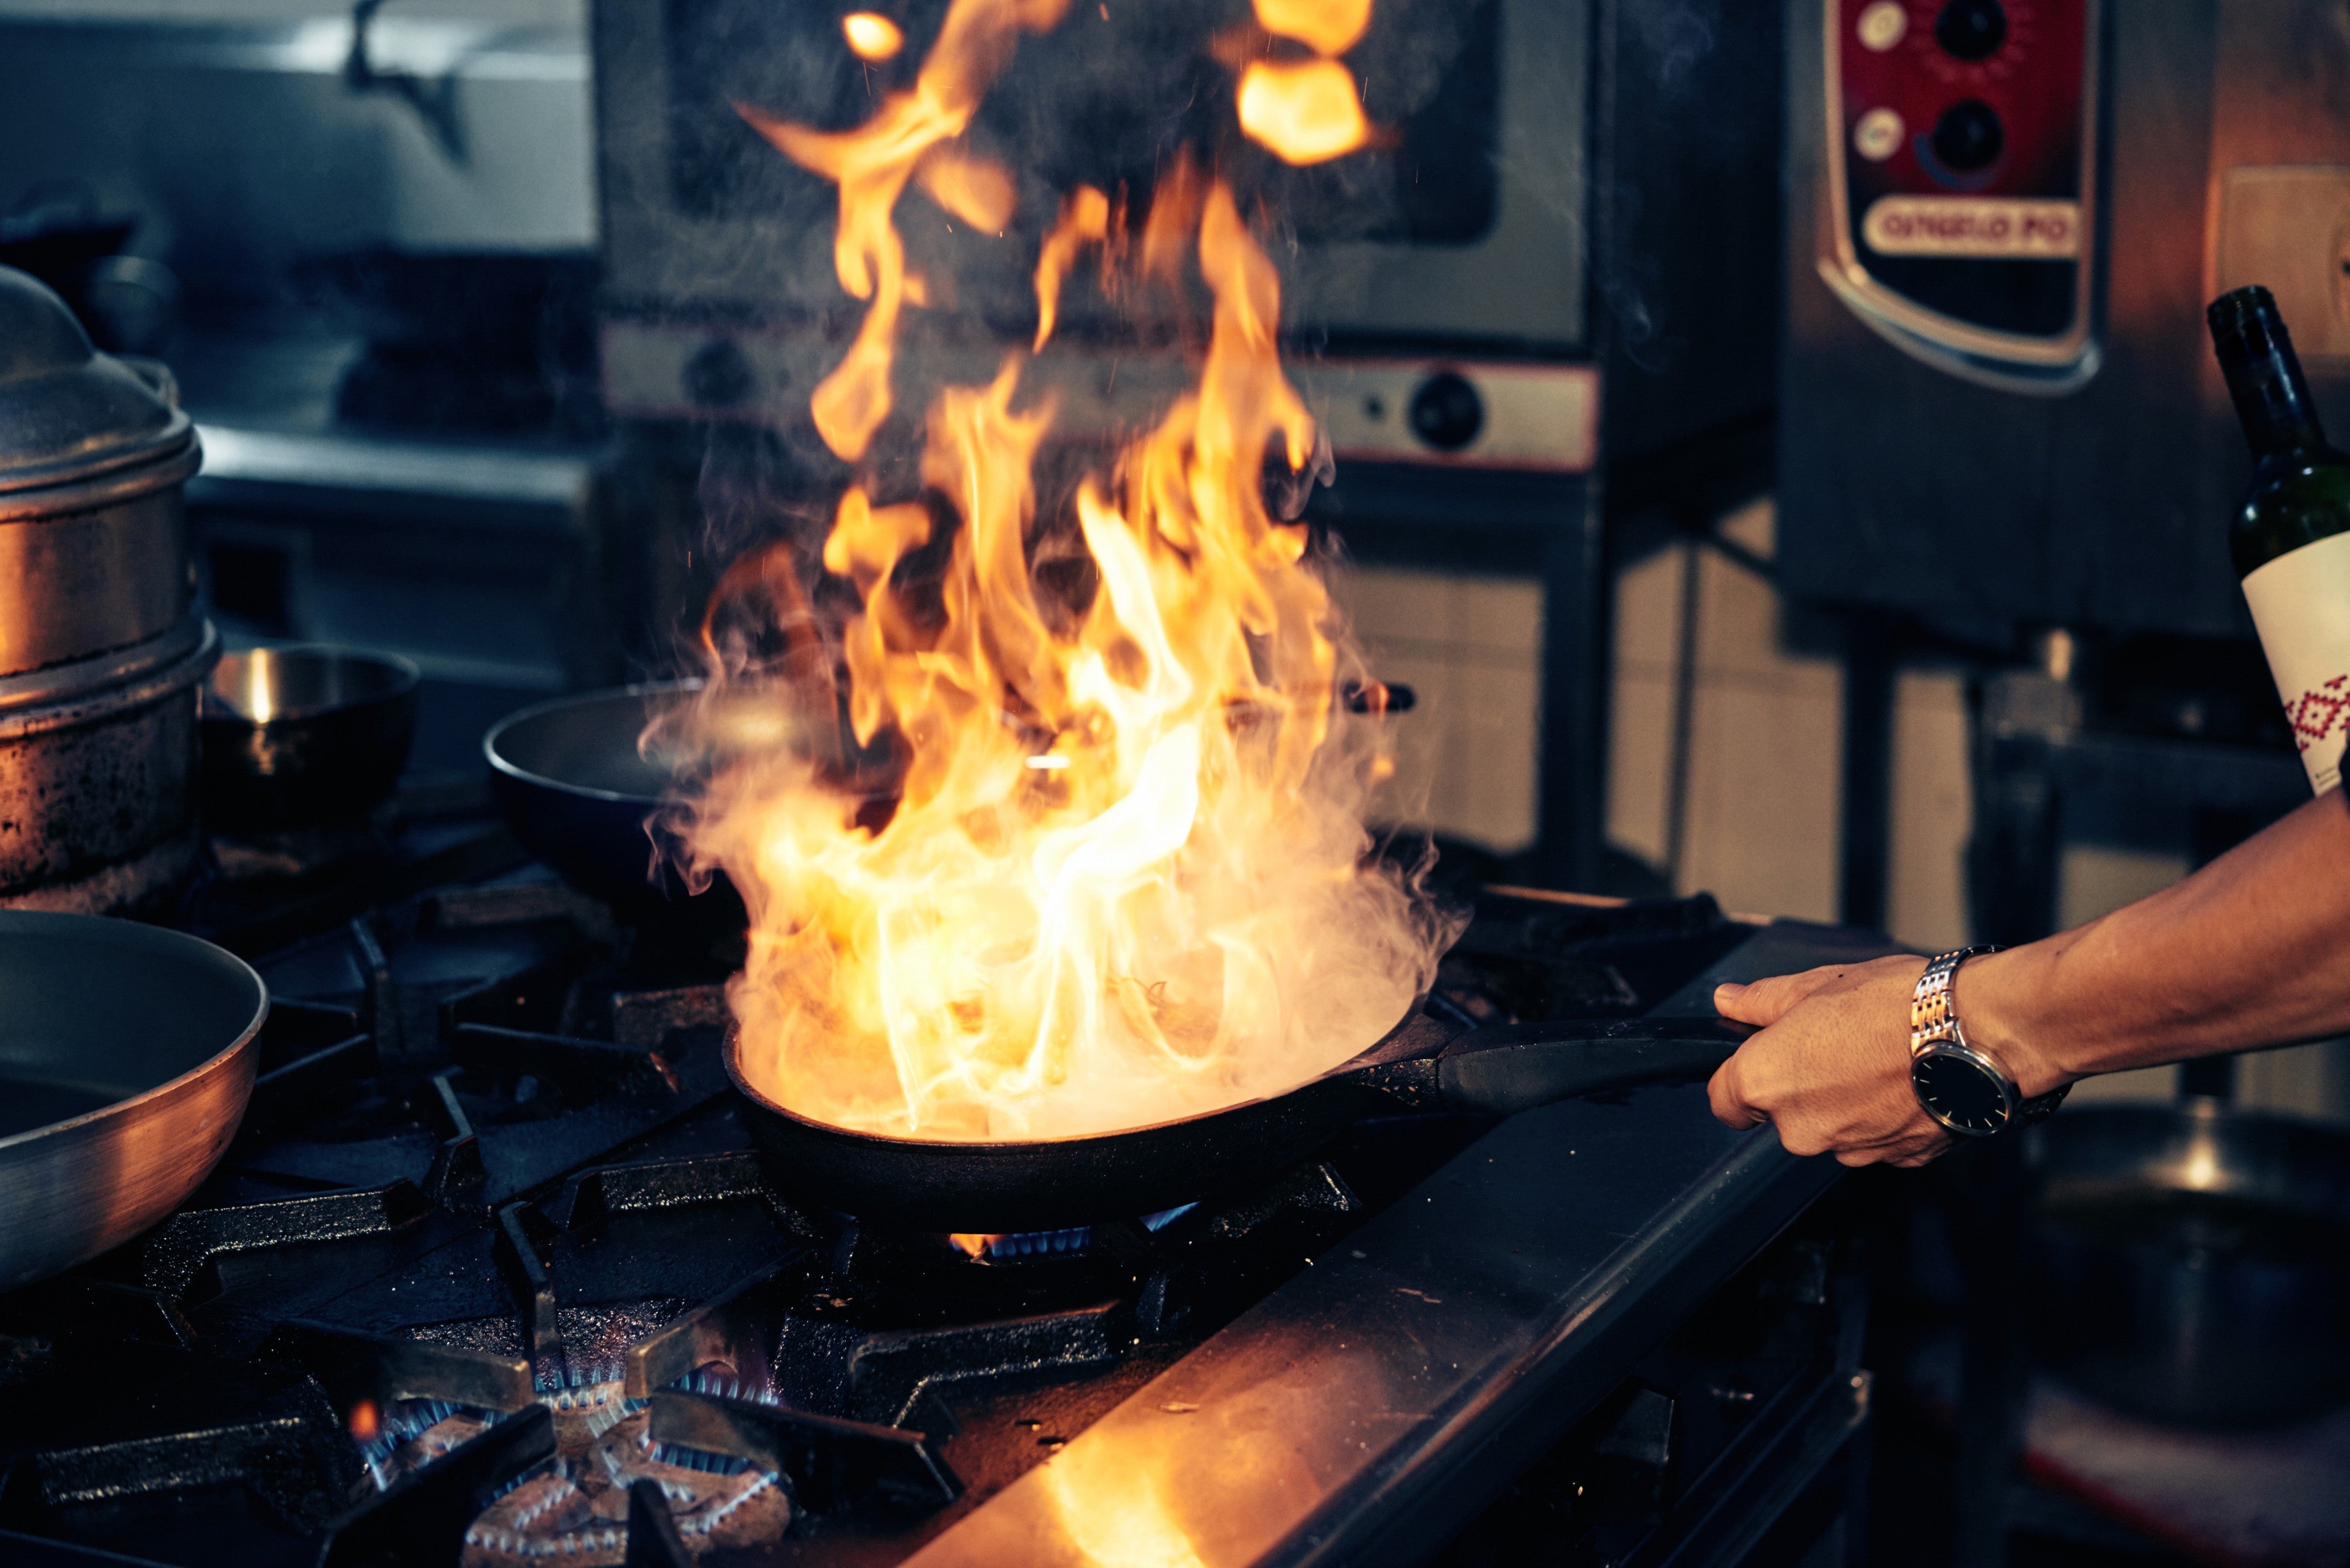 The Definitive Guide to Safely Stopping a Grease Fire in Your Kitchen